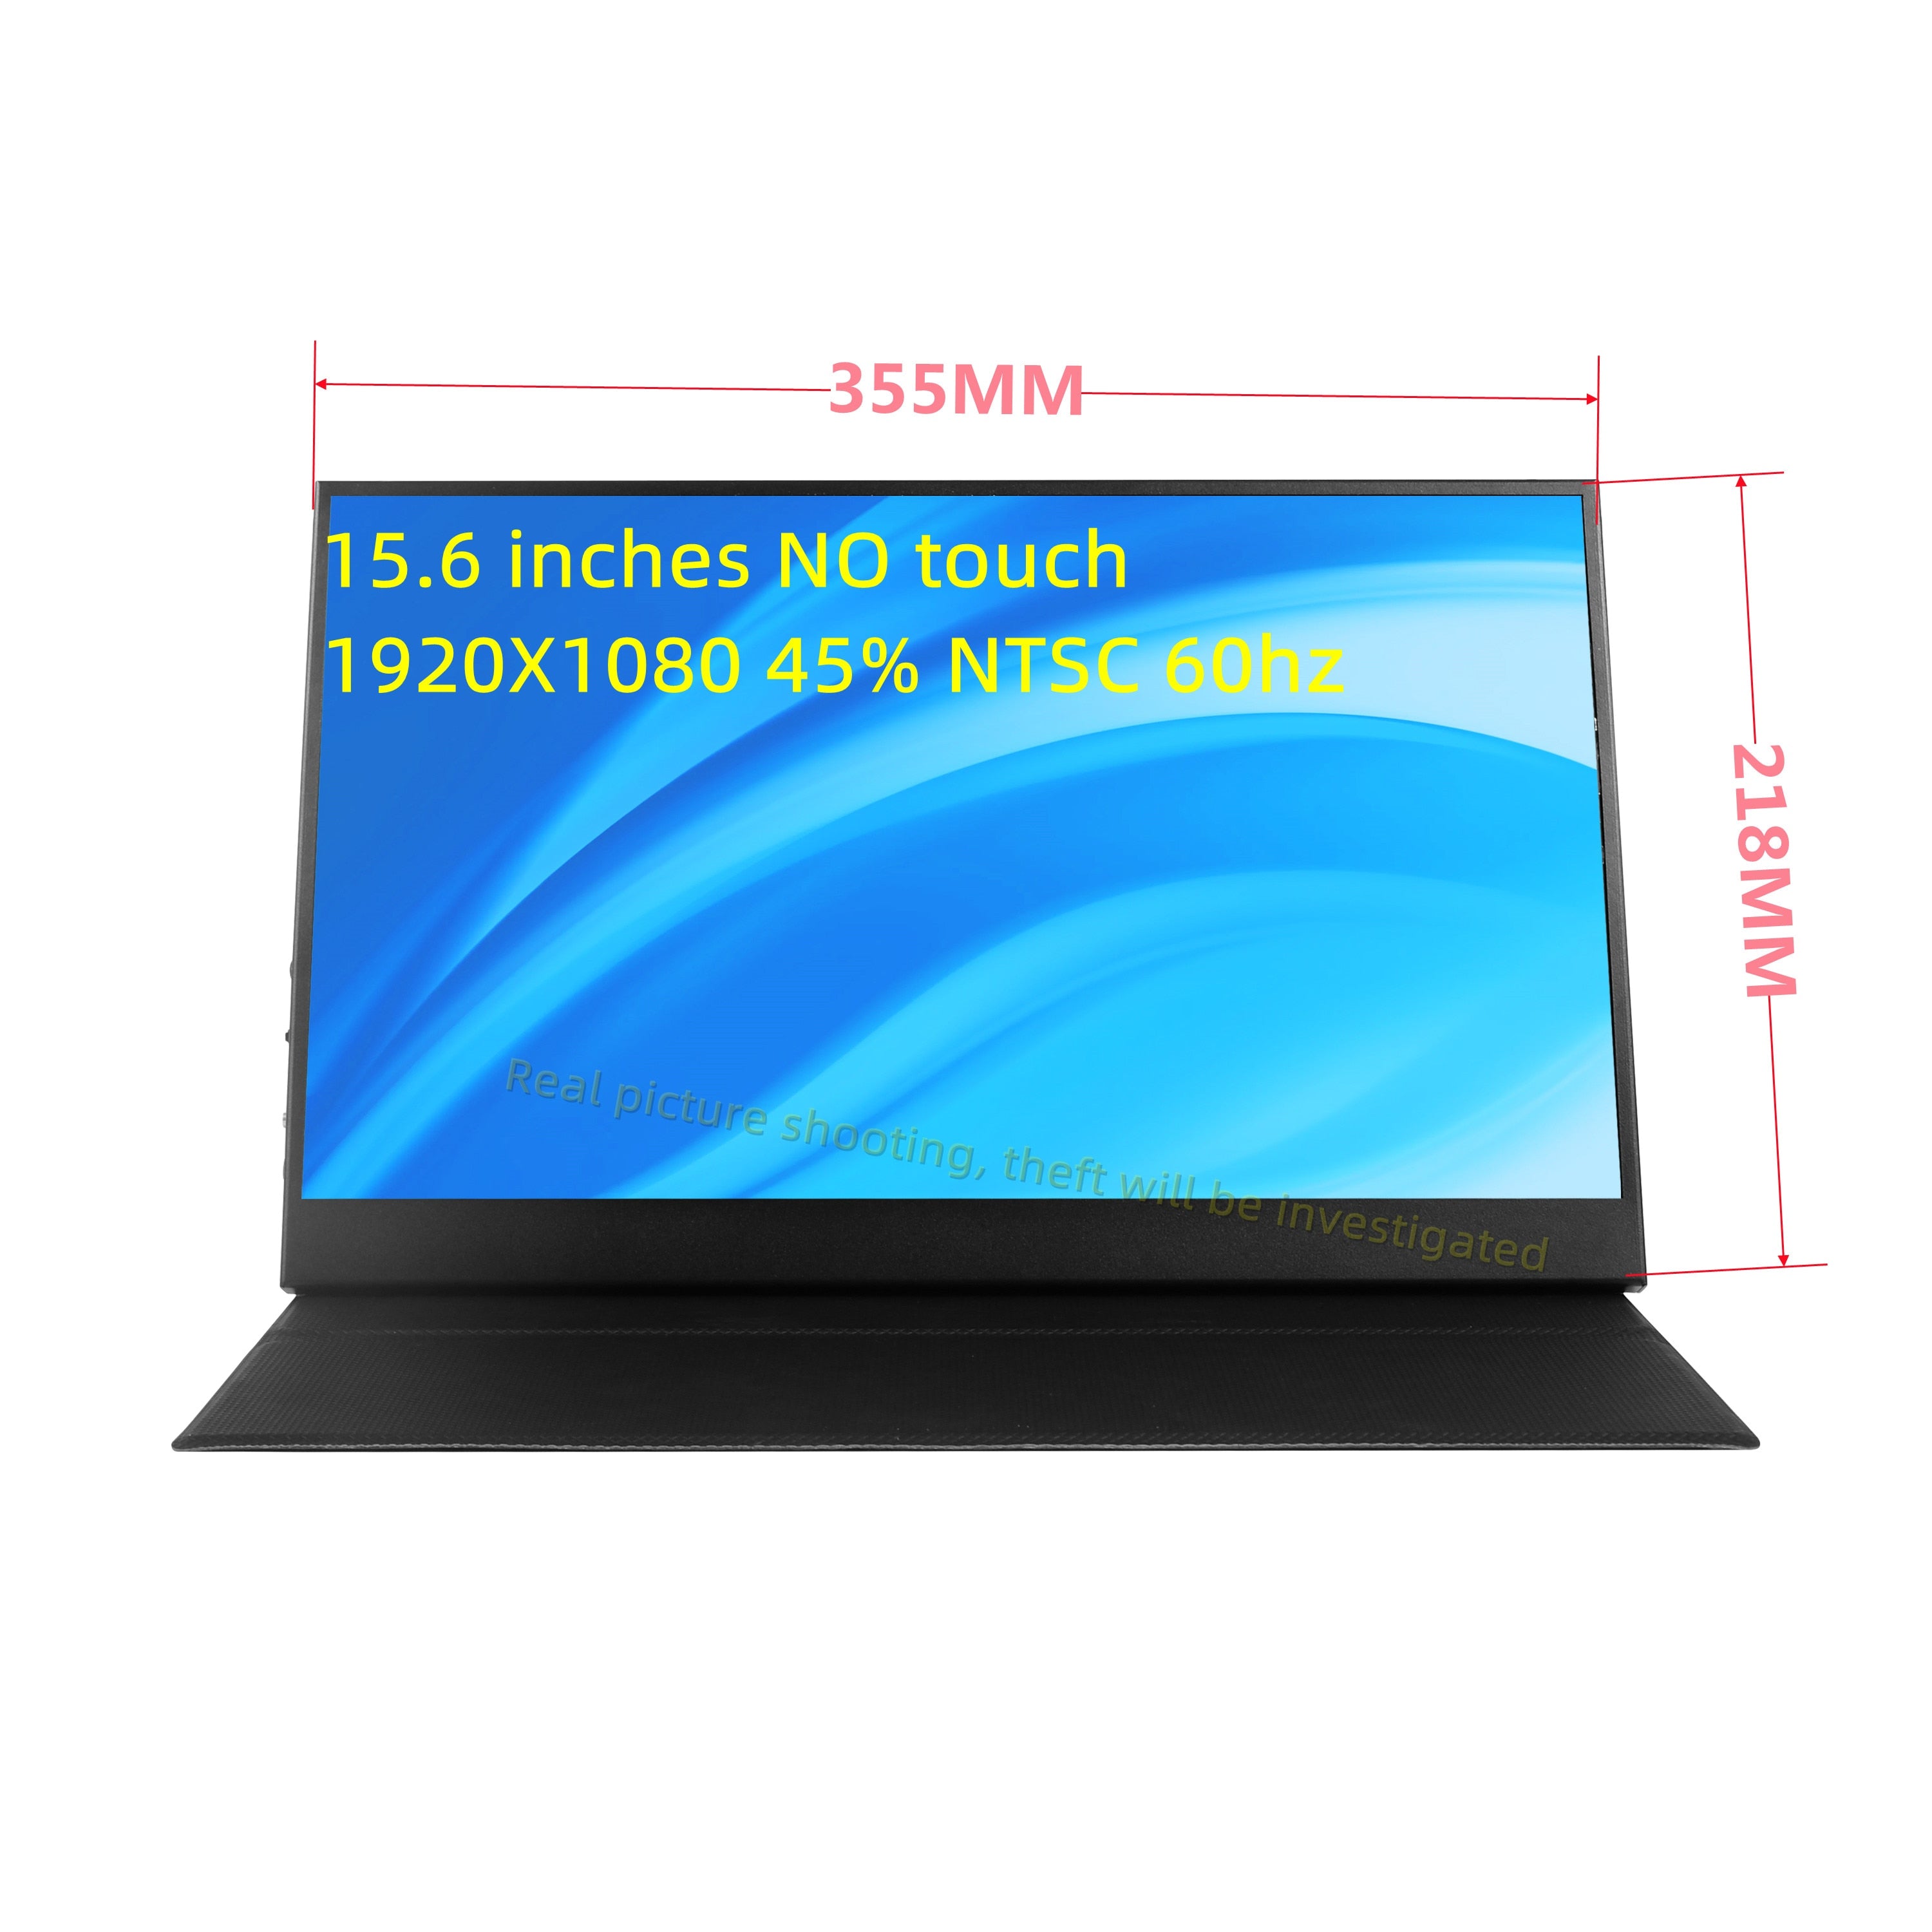 14.015.6Inch 1080P Monitor HD Portable IPS Touch Screen HDMI-Compatible Gaming Display For Switch PS5 Xbox Macbook Pro Mobile PC